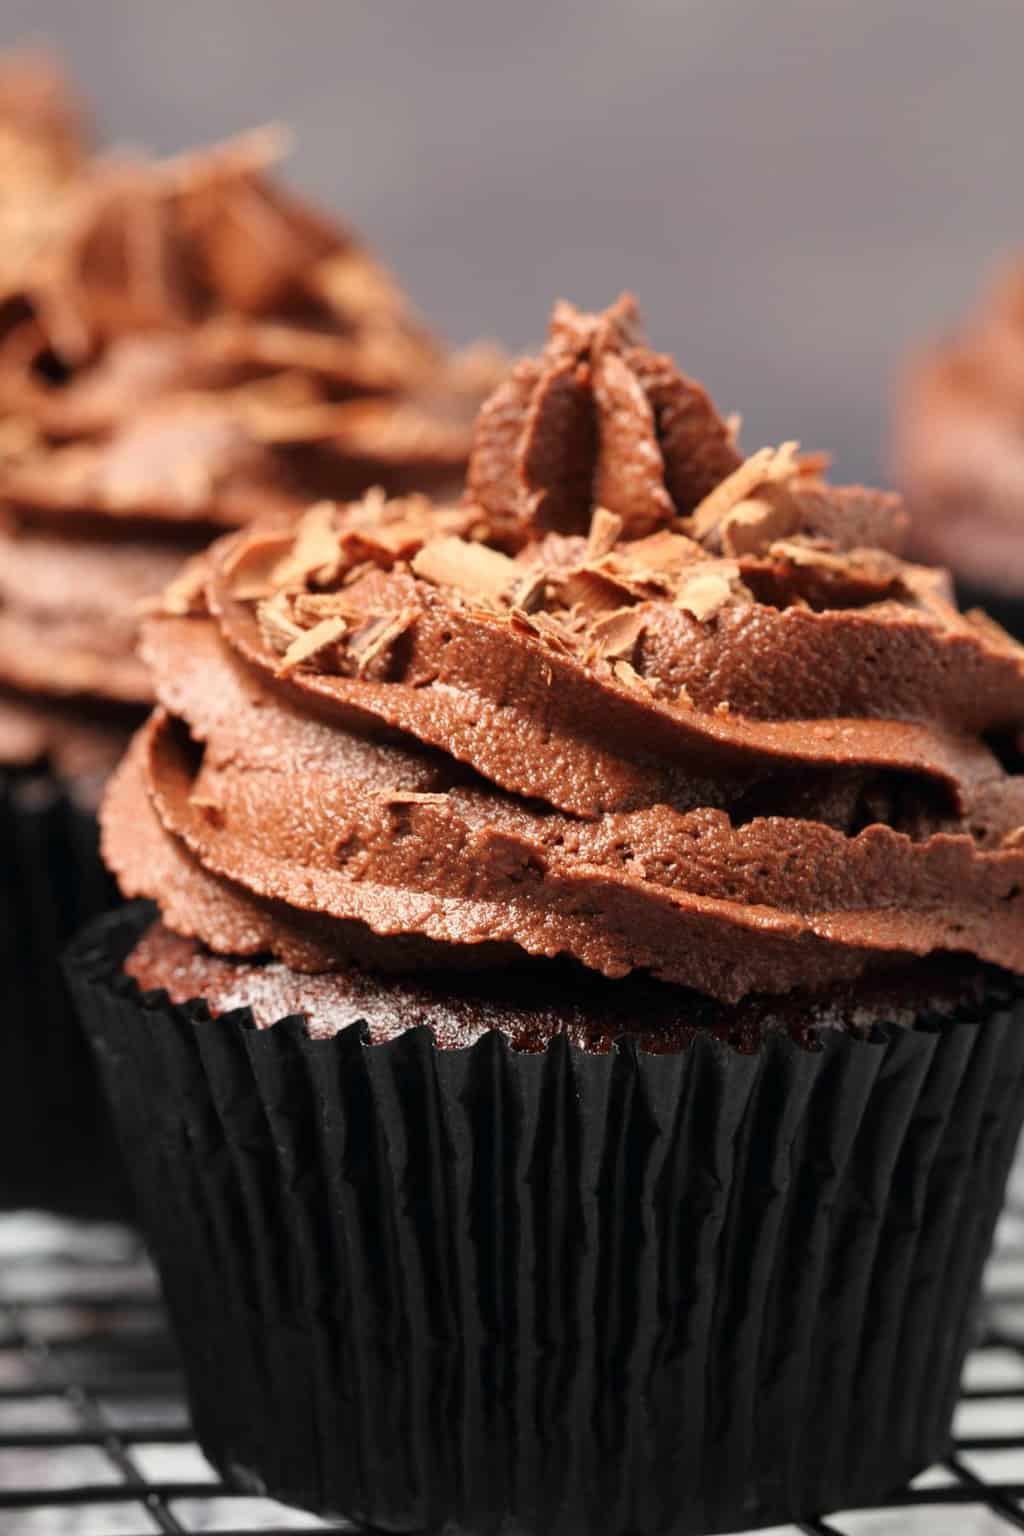 Classic vegan chocolate cupcakes topped with vegan chocolate buttercream and chocolate shavings.